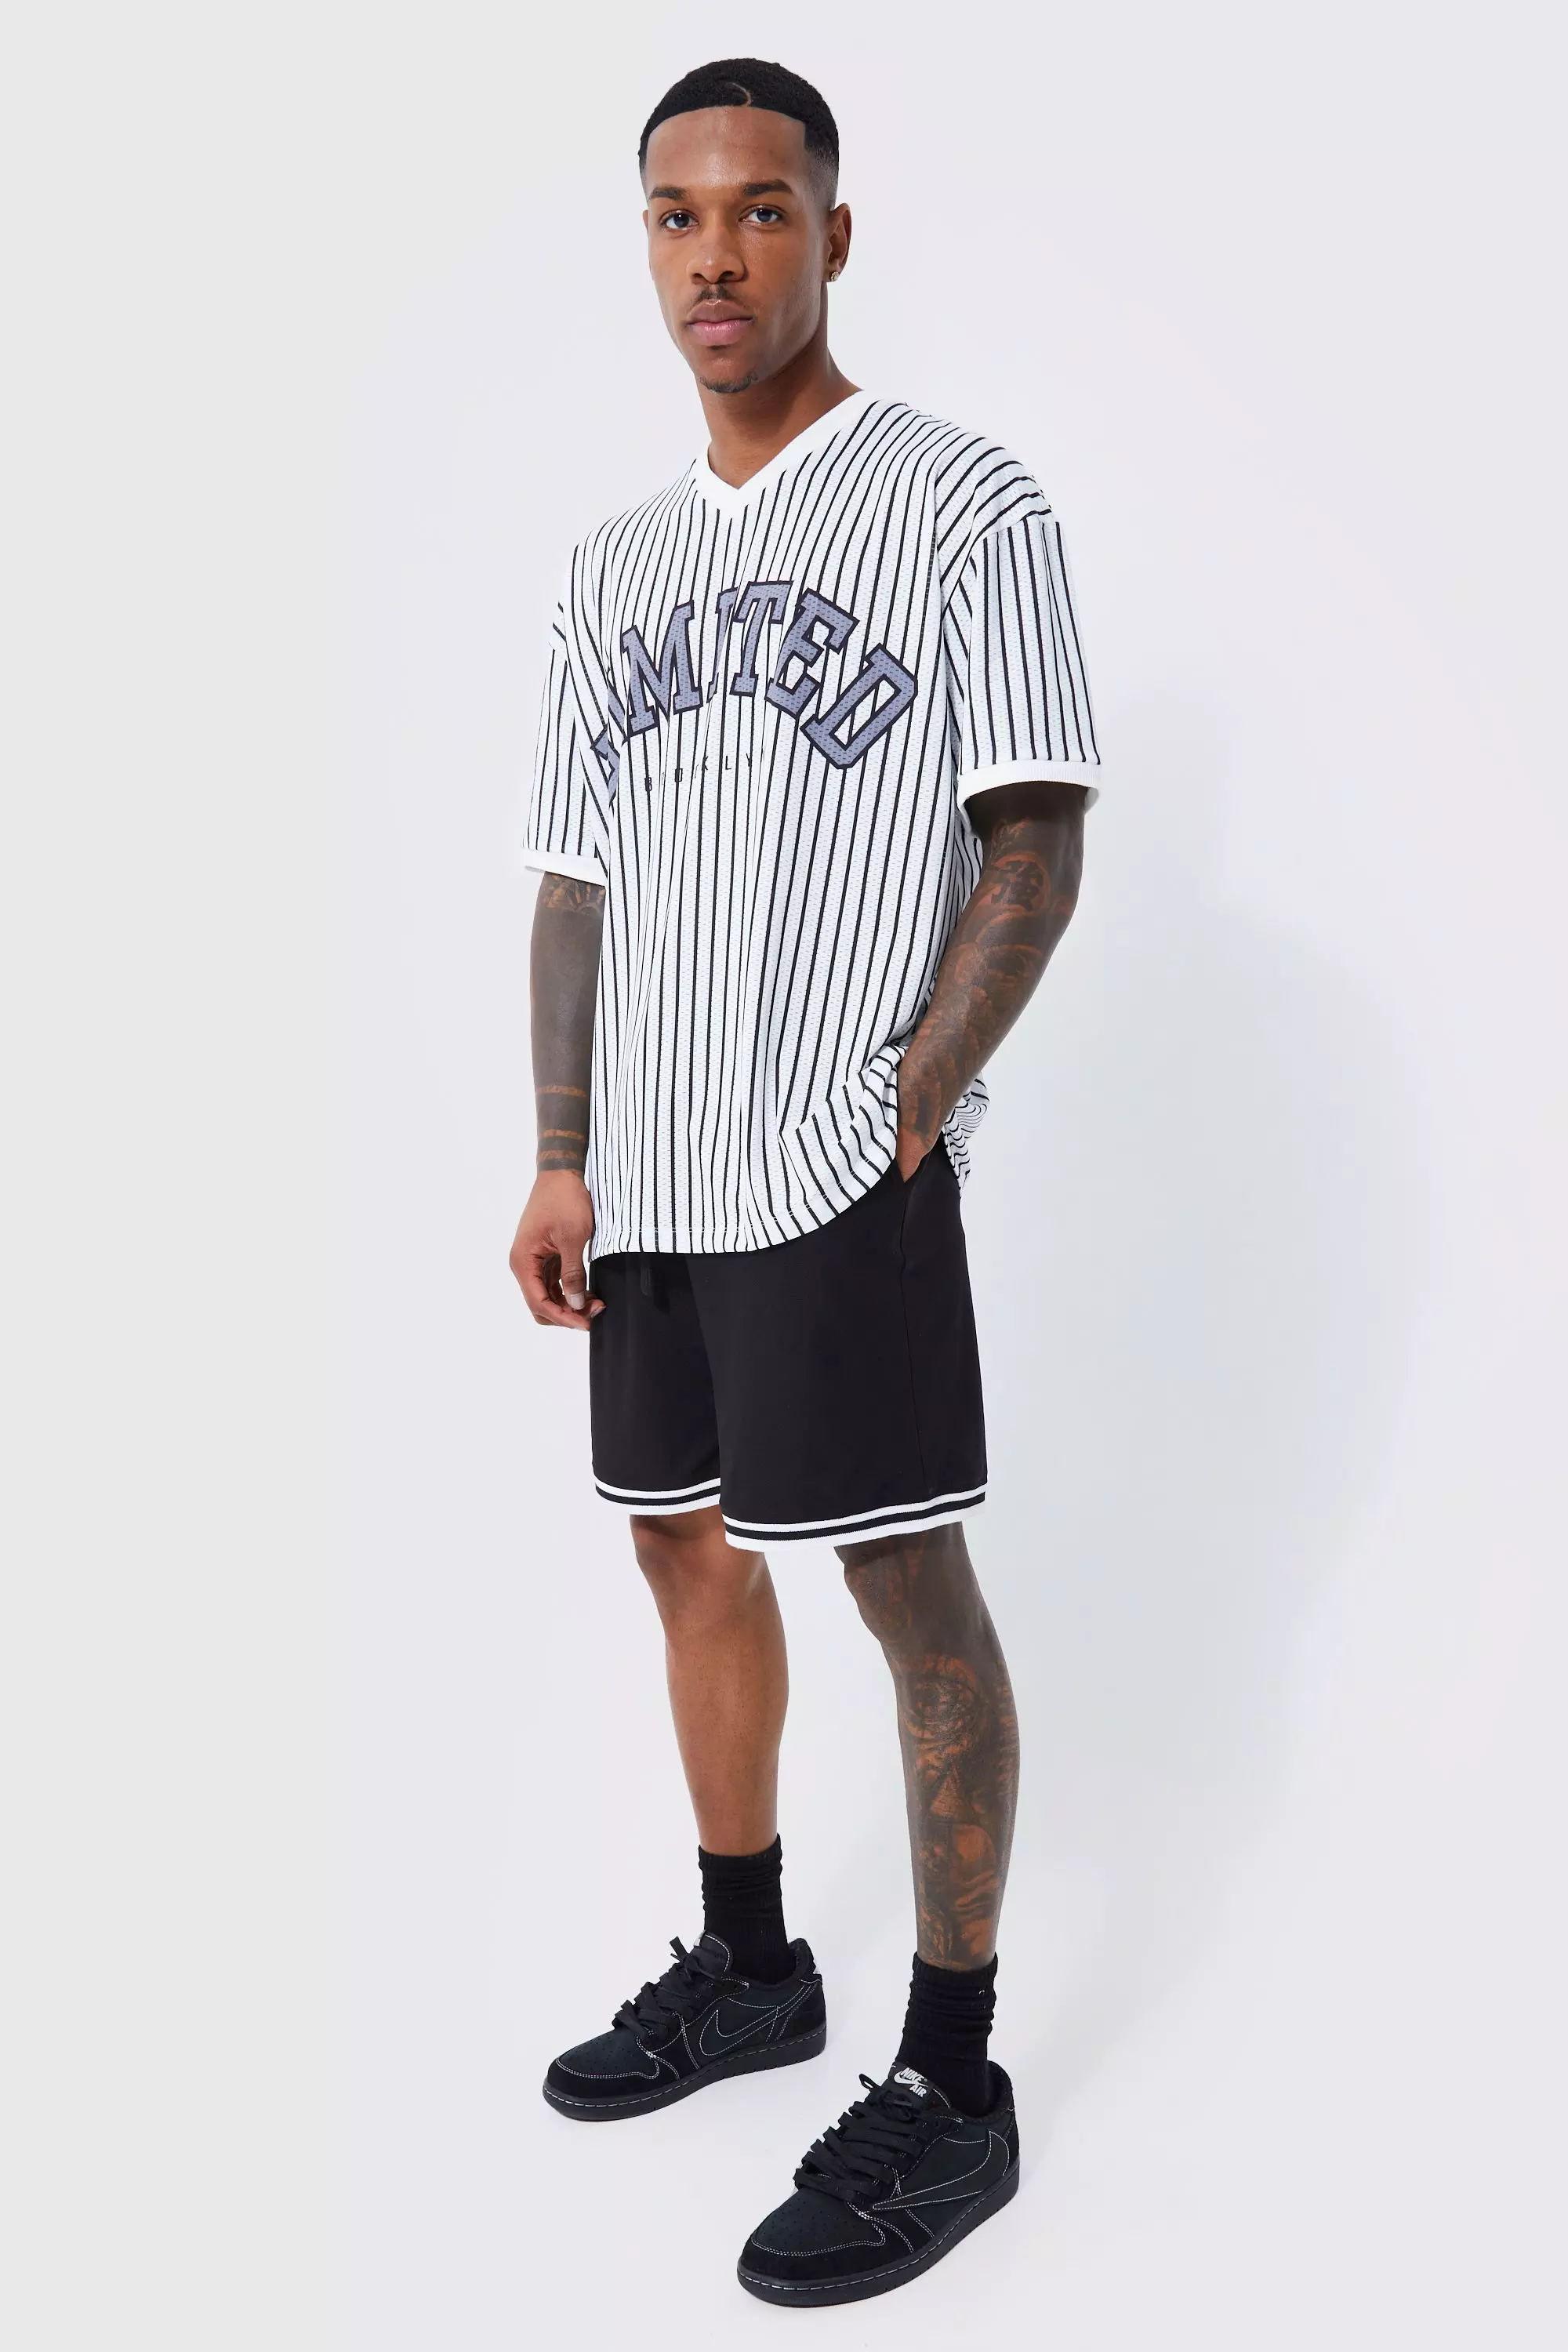  Brightmany Shirts for Men Men Letter Graphic Striped Cuff  Sports Mesh Shirt (Color : Black, Size : Small) : Clothing, Shoes & Jewelry